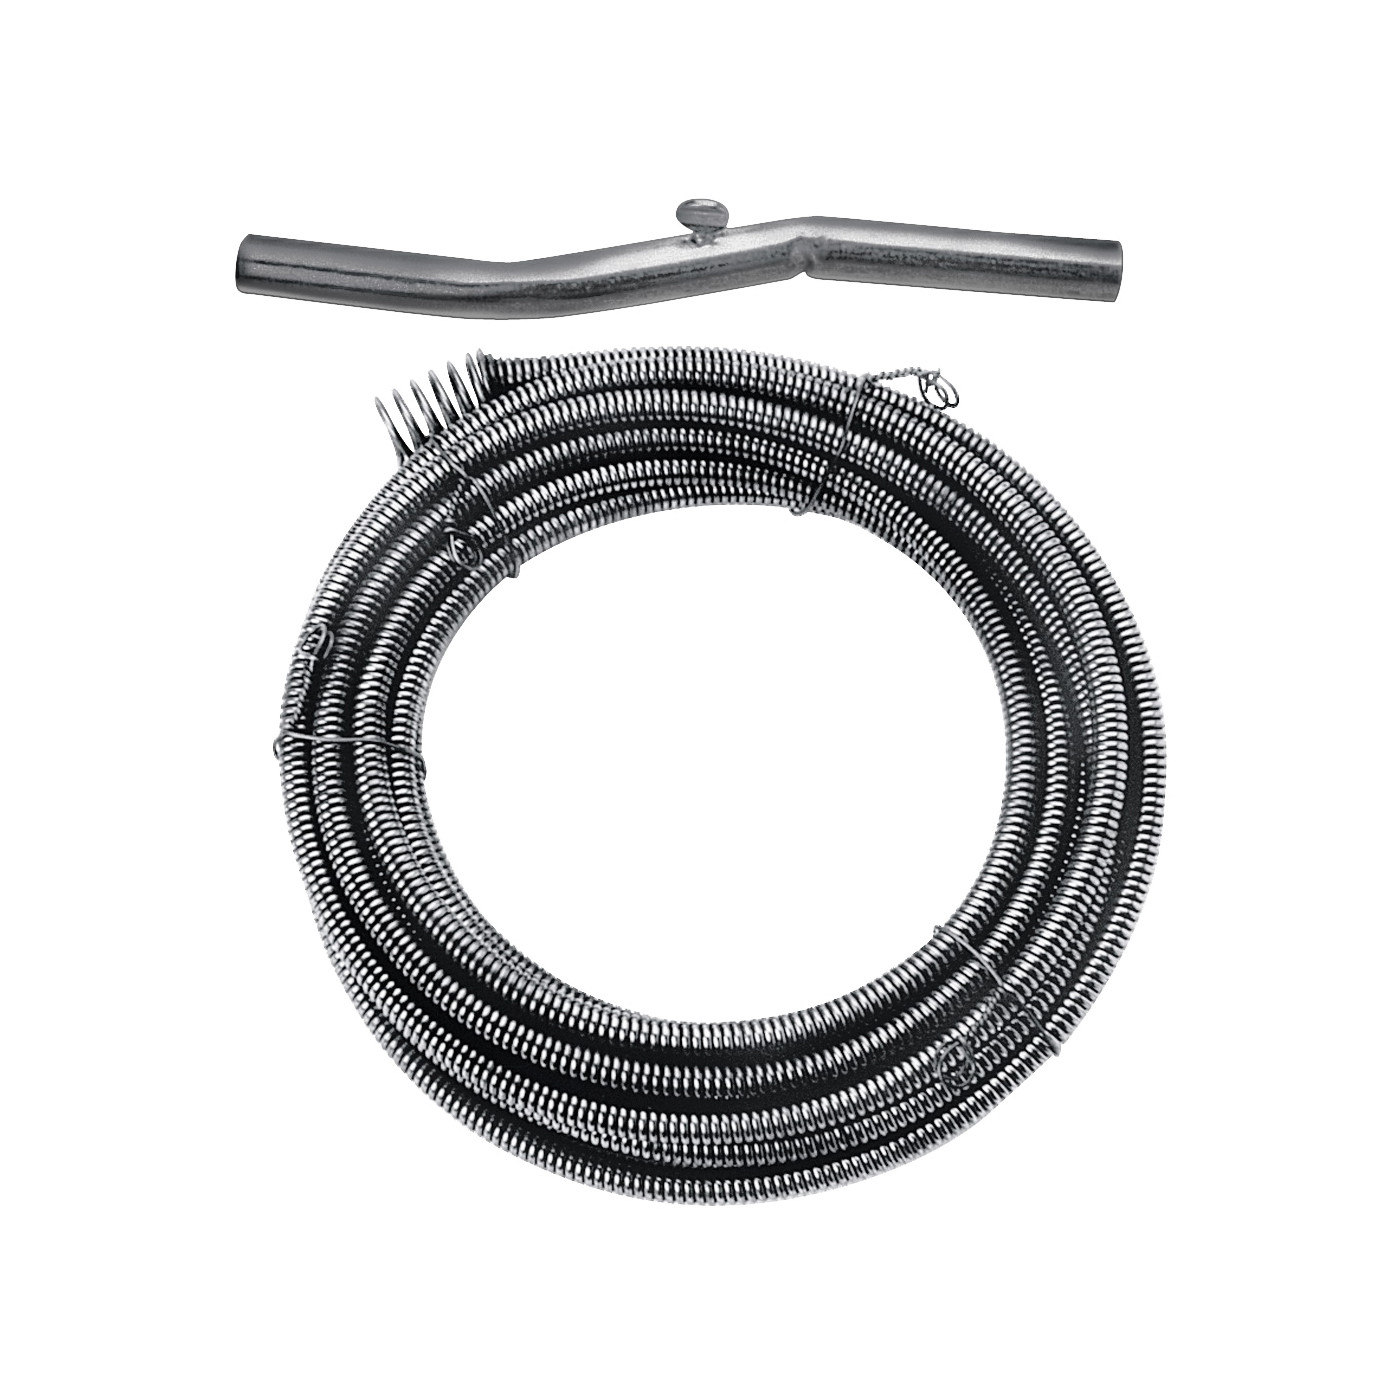 COBRA TOOLS 10000 Series 10250 Drain Pipe Auger, 1/4 in Dia Cable, 25 ft L Cable - 1